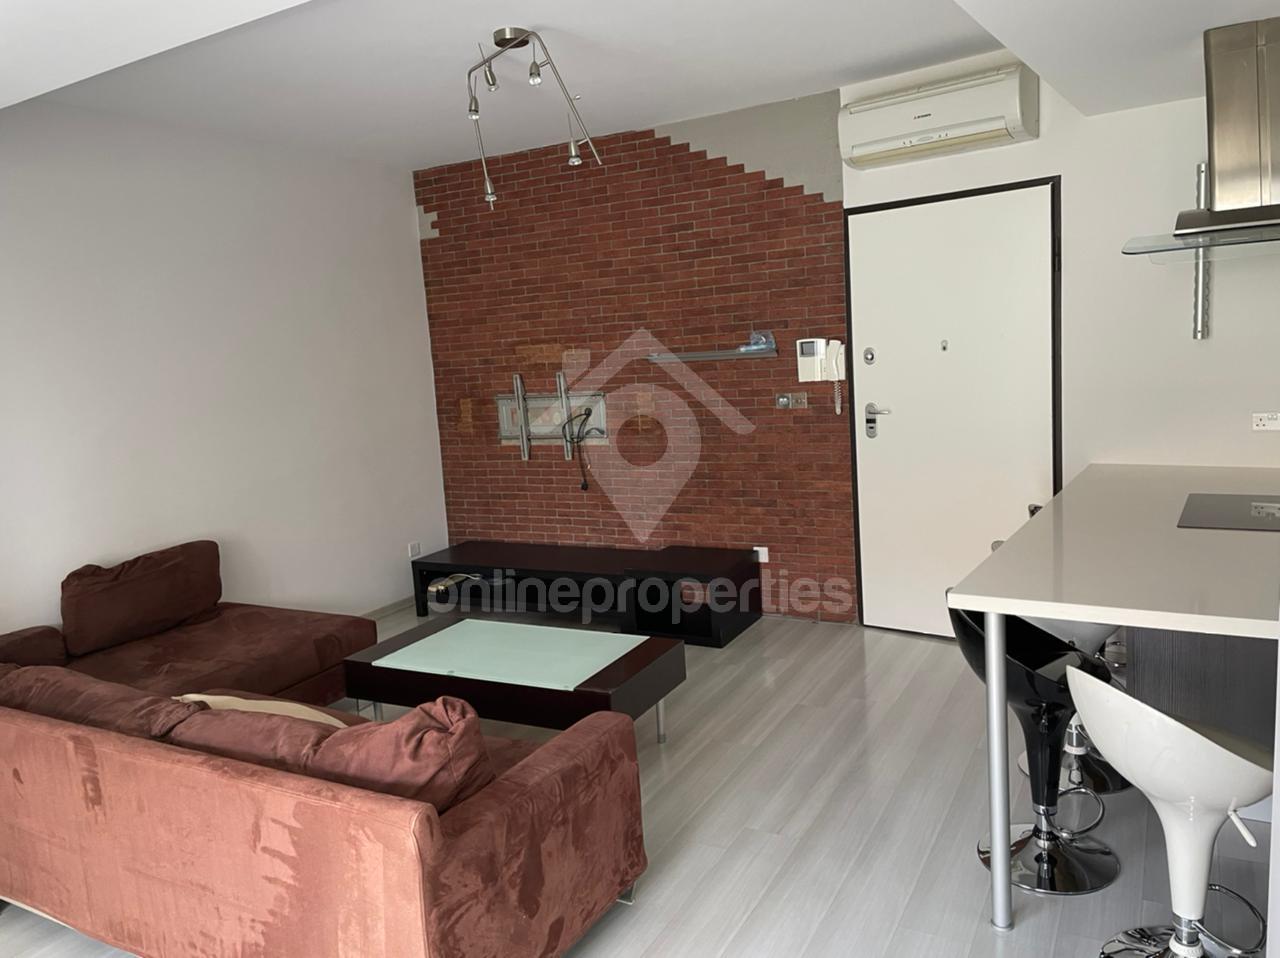 Modern High End apartment furnished one bed